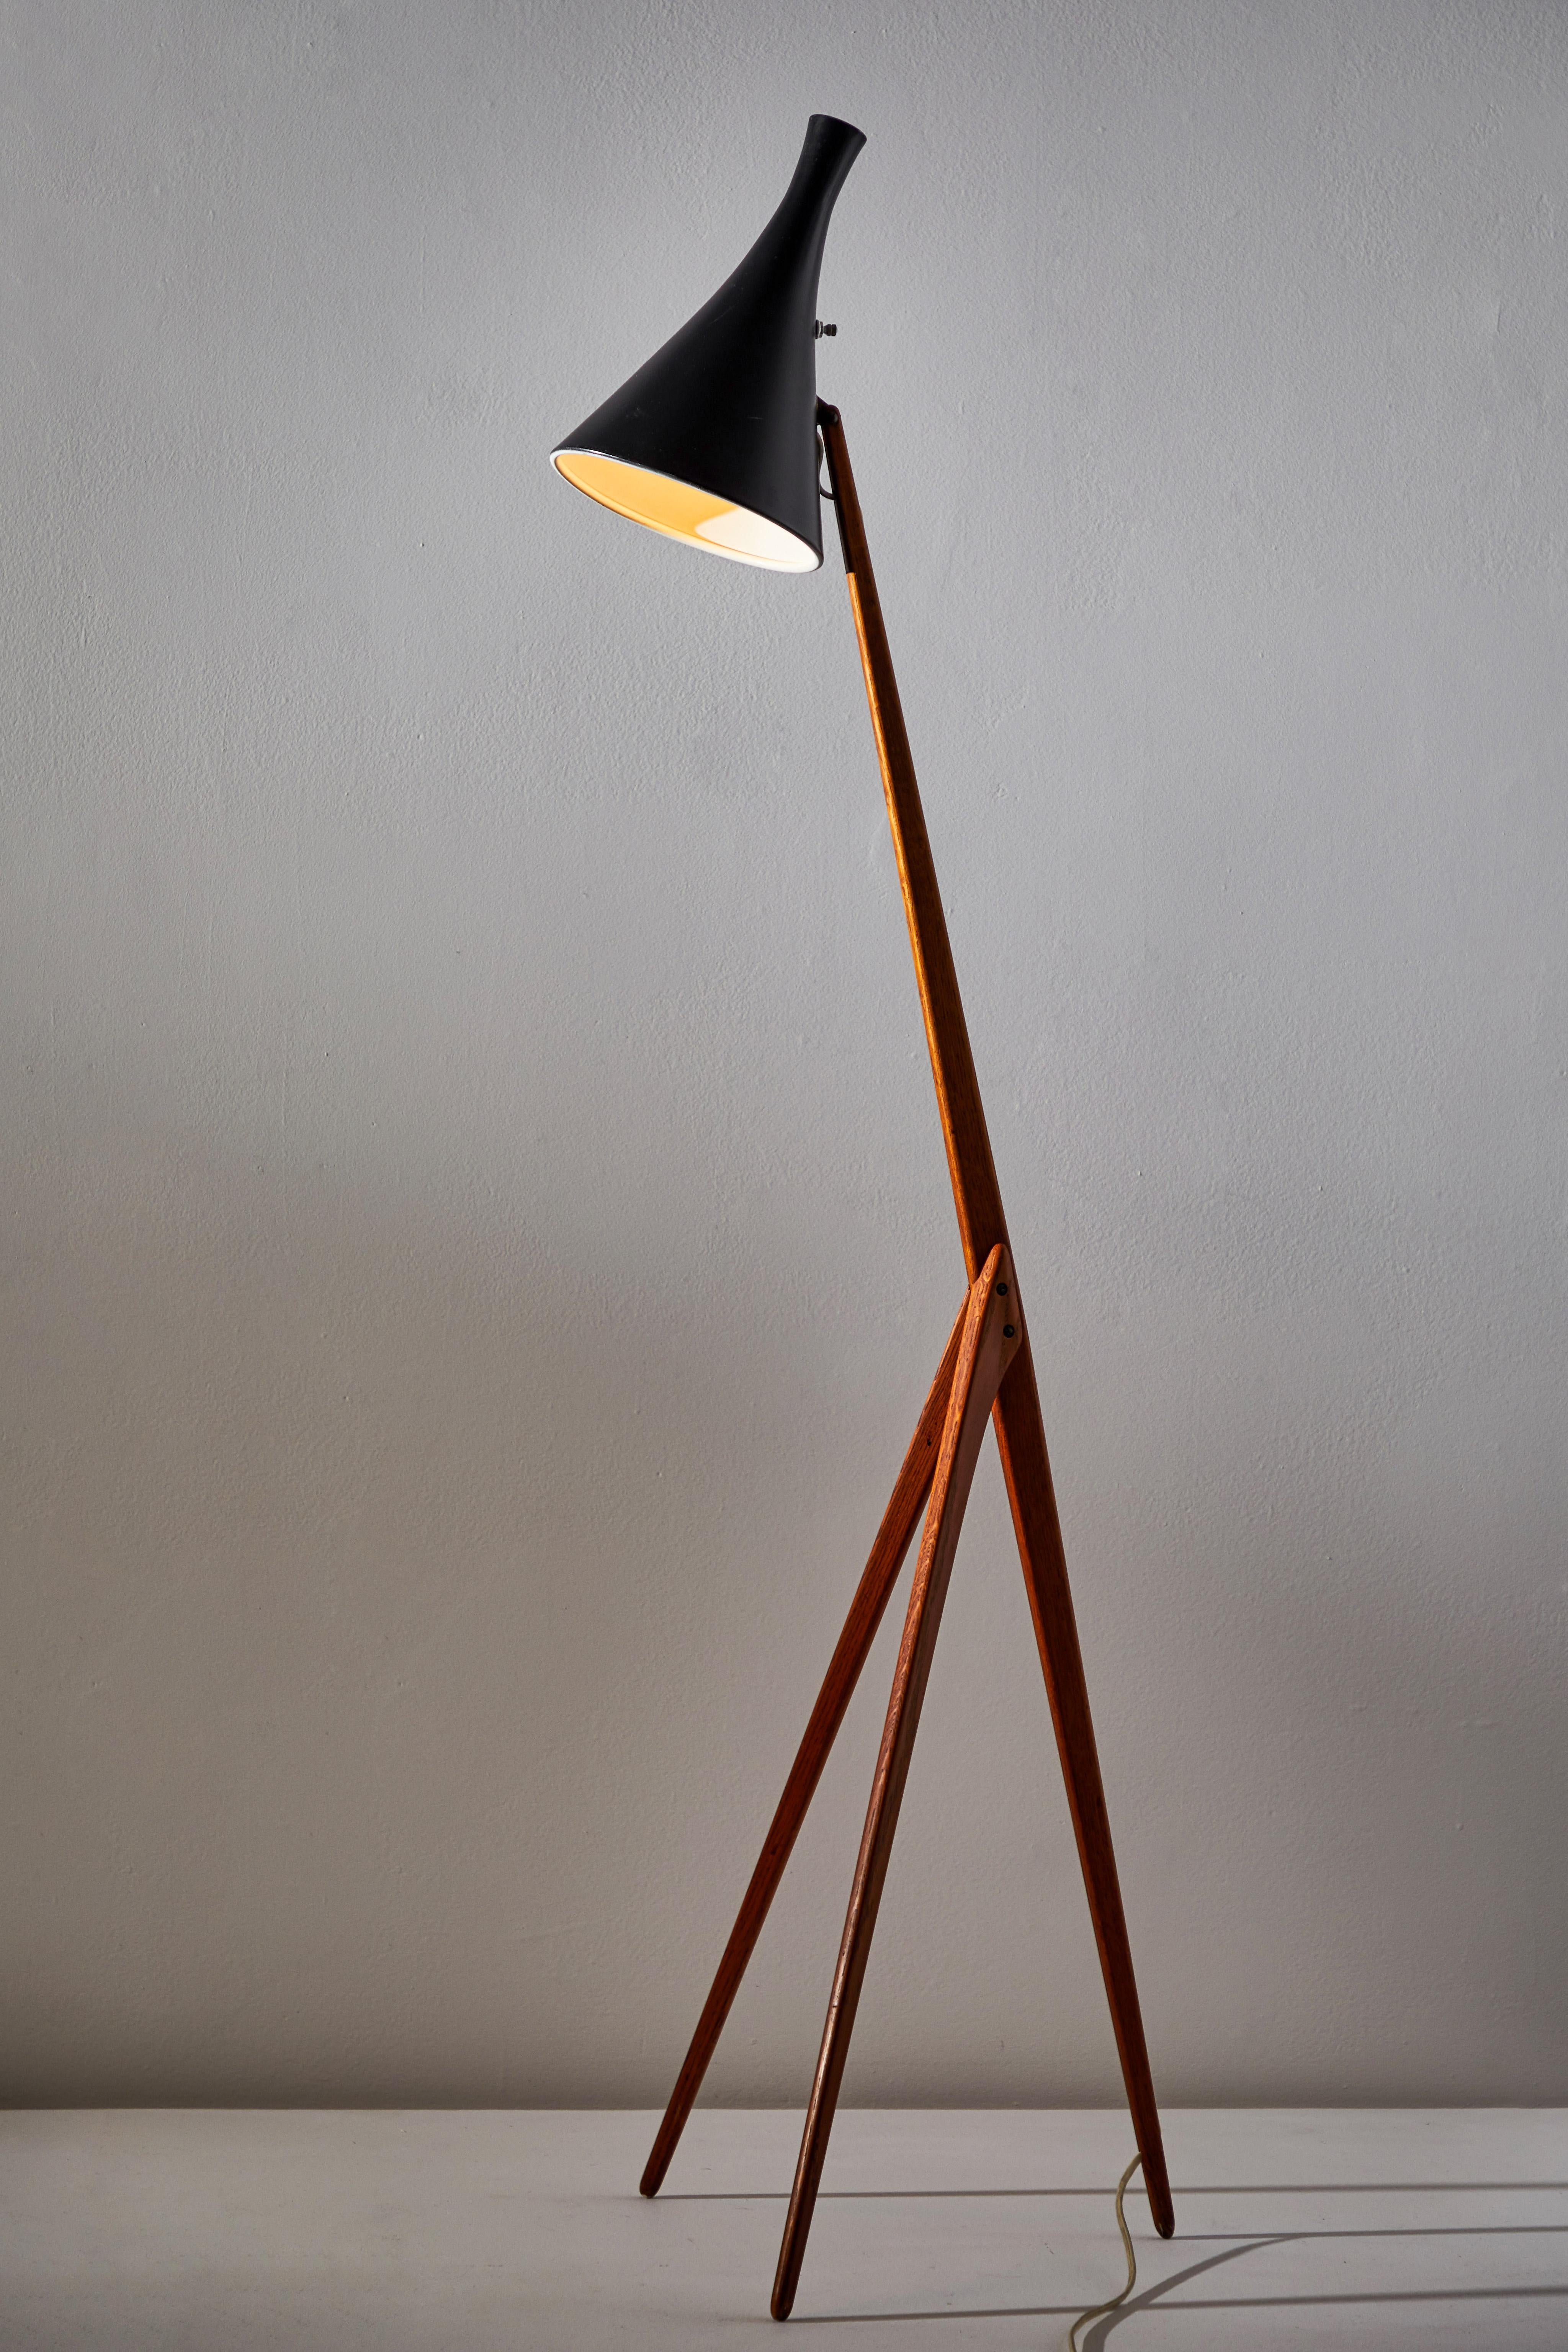 Rare Giraffe floor lamp by Uno & Östen Kristiansson for Luxus. Designed and manufactured in Sweden, circa 1950s. Original cord with U.S. plug. Oak with rare adjustable metal shade. Takes one E26 100w maximum Edison bulb. Bulbs provided as a one time